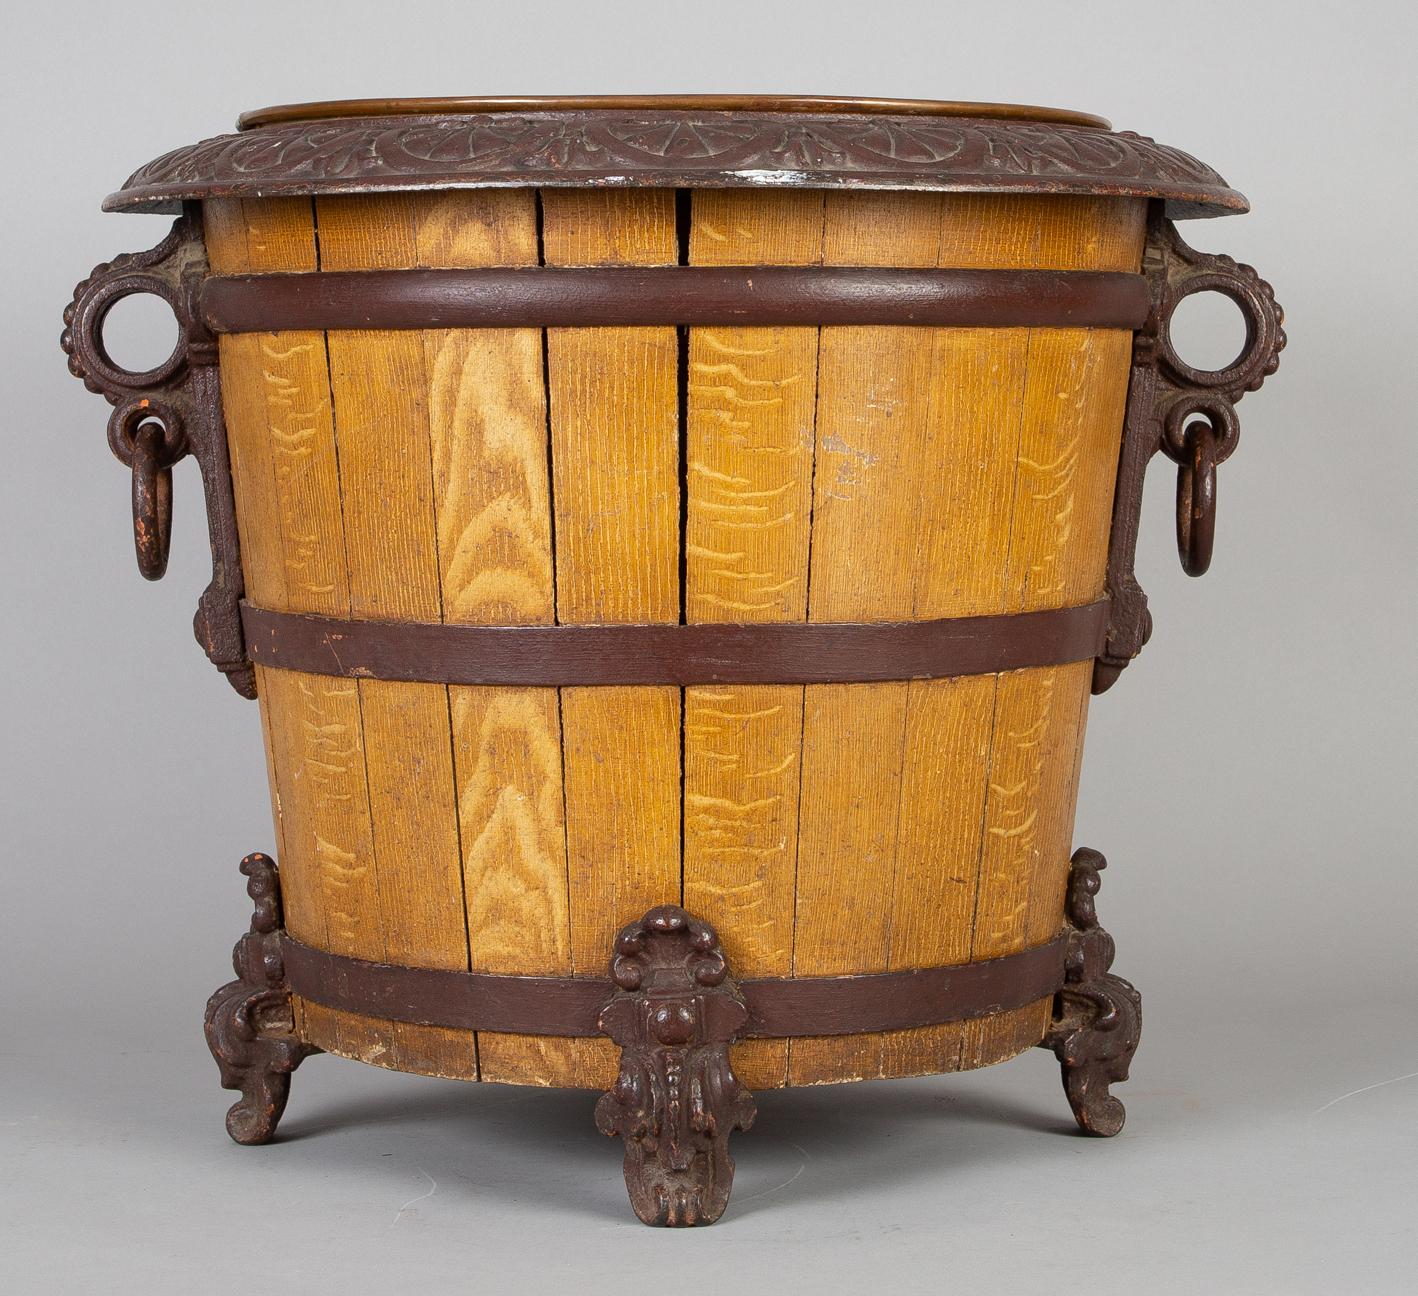 Cast iron and wooden jardinière or log container in barrel form with a copper liner, tapered wooden staves bound by cast iron hoops, decorative ring handles and feet.